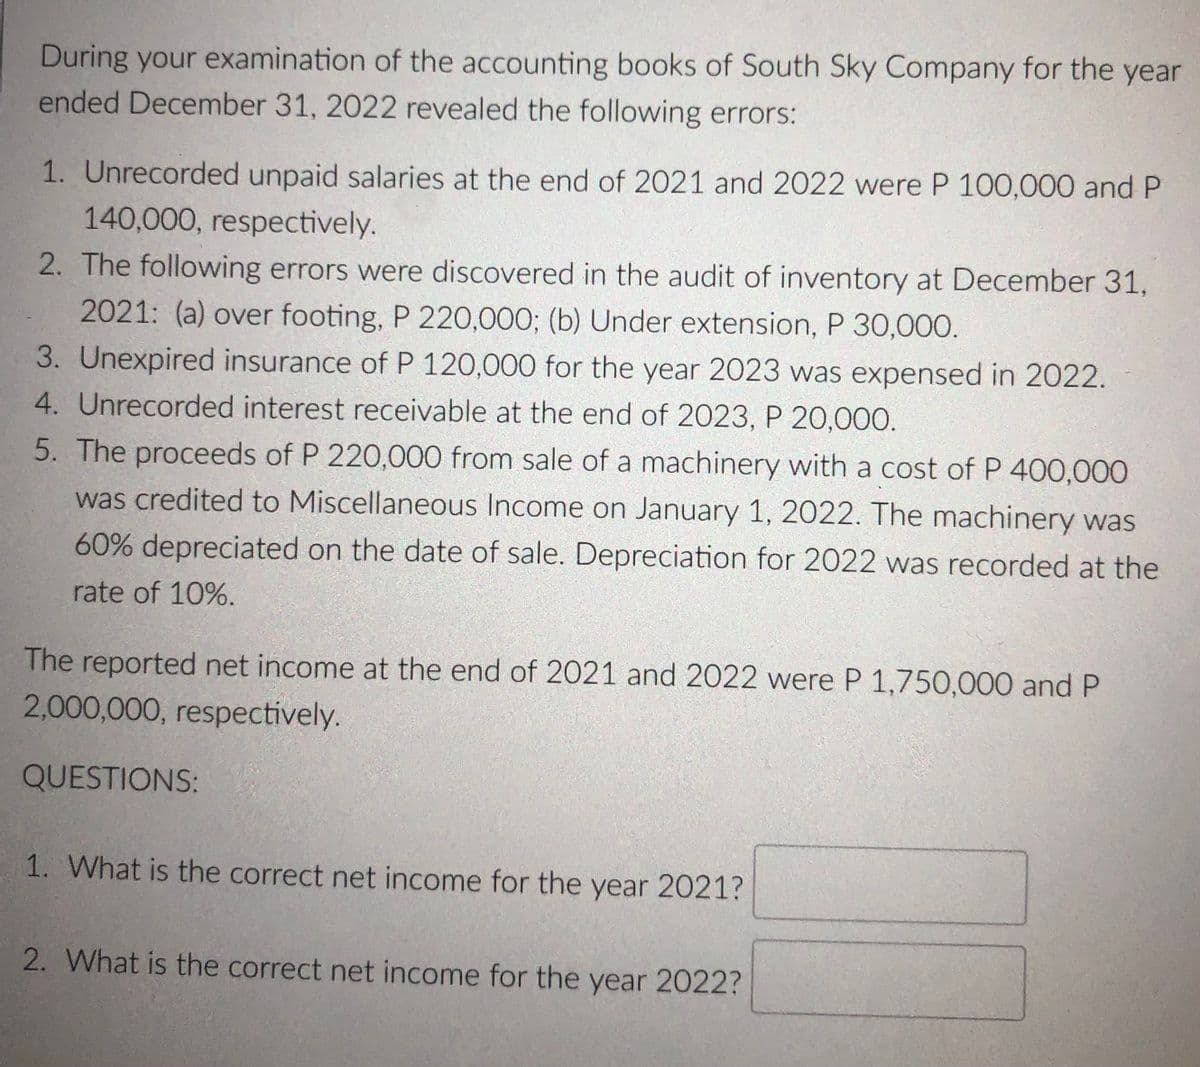 During your examination of the accounting books of South Sky Company for the year
ended December 31, 2022 revealed the following errors:
1. Unrecorded unpaid salaries at the end of 2021 and 2022 were P 100,000 and P
140,000, respectively.
2. The following errors were discovered in the audit of inventory at December 31,
2021: (a) over footing, P 220,000; (b) Under extension, P 30,000.
3. Unexpired insurance of P 120,000 for the year 2023 was expensed in 2022.
4. Unrecorded interest receivable at the end of 2023, P 20,000.
5. The proceeds of P 220,000 from sale of a machinery with a cost of P 400,000
was credited to Miscellaneous Income on January 1, 2022. The machinery was
60% depreciated on the date of sale. Depreciation for 2022 was recorded at the
rate of 10%.
The reported net income at the end of 2021 and 2022 were P 1,750,000 and P
2,000,000, respectively.
QUESTIONS:
1. What is the correct net income for the year 2021?
2. What is the correct net income for the year 2022?
